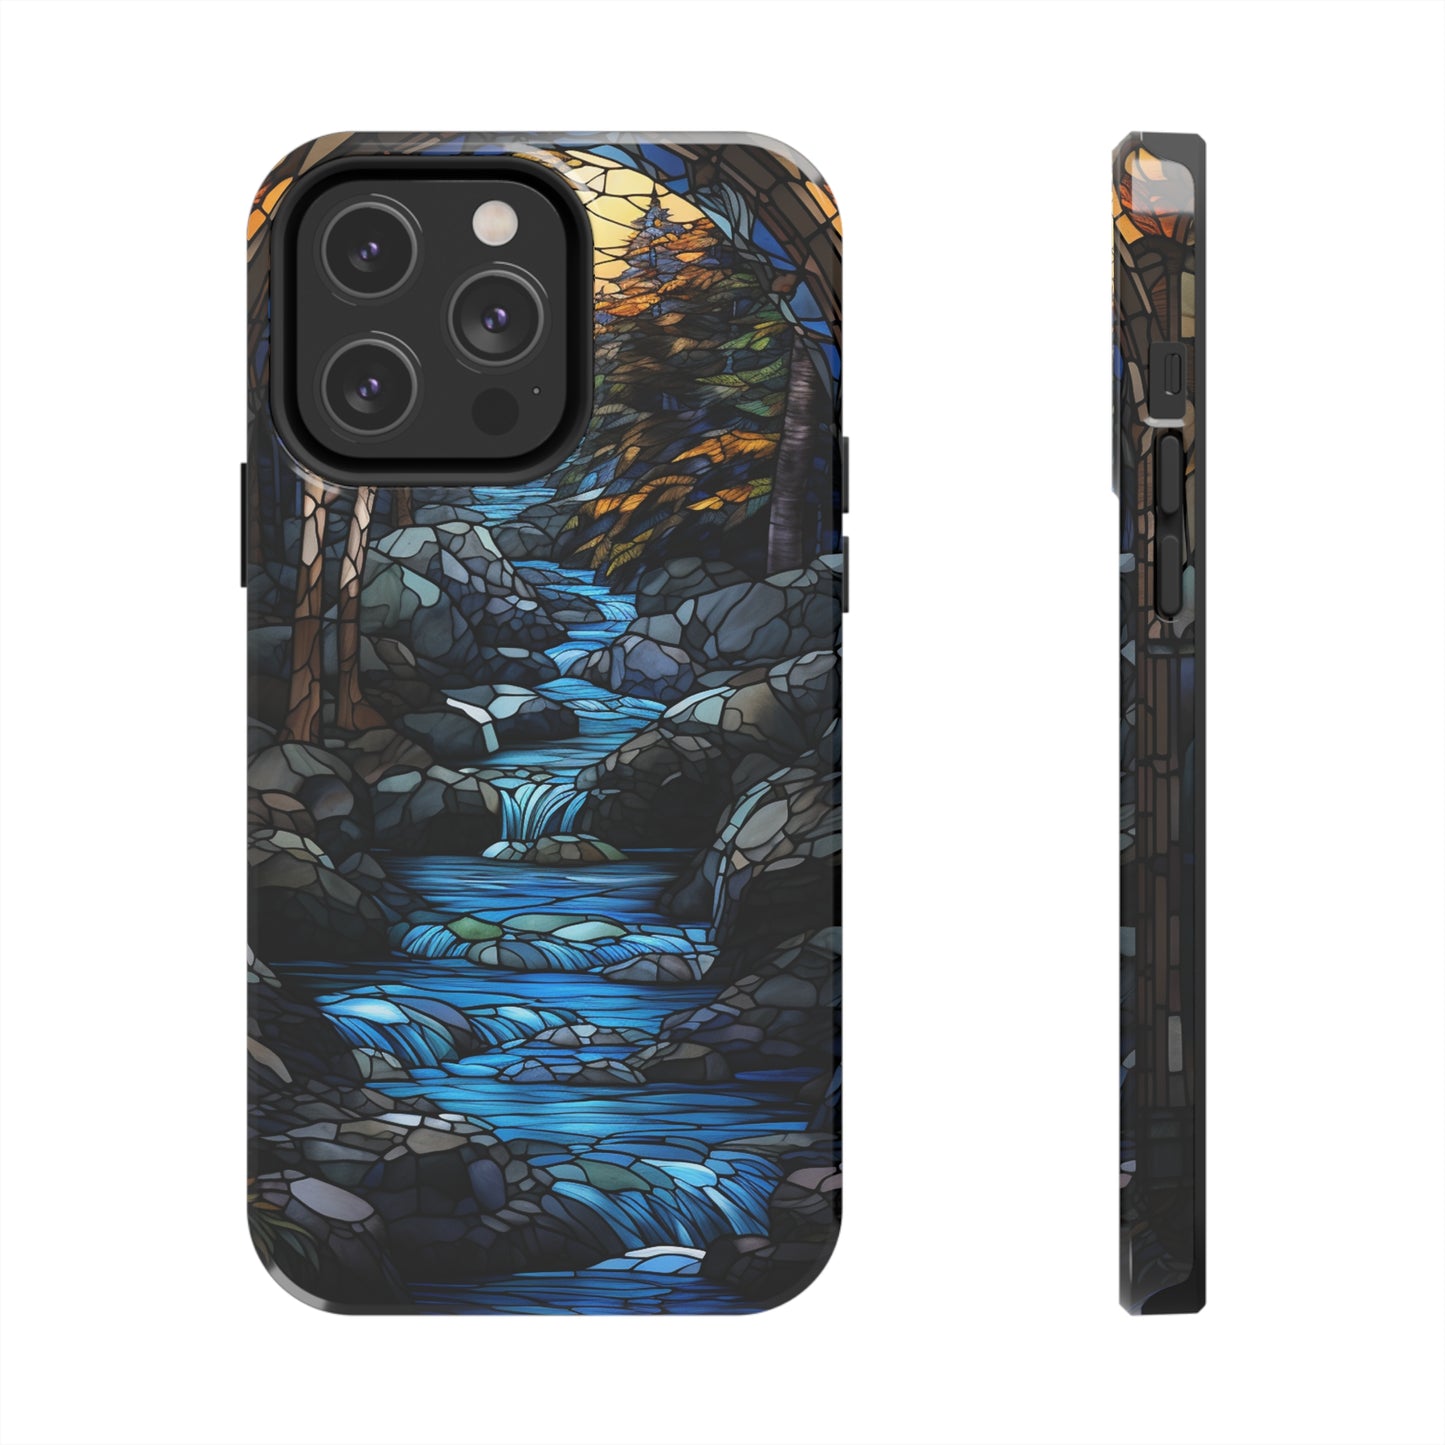 Stained Glass Stone Bridge and River Phone Case: Art Nouveau Floral Design | Bohemian Elegance Compatible with iPhone 14 Pro Max